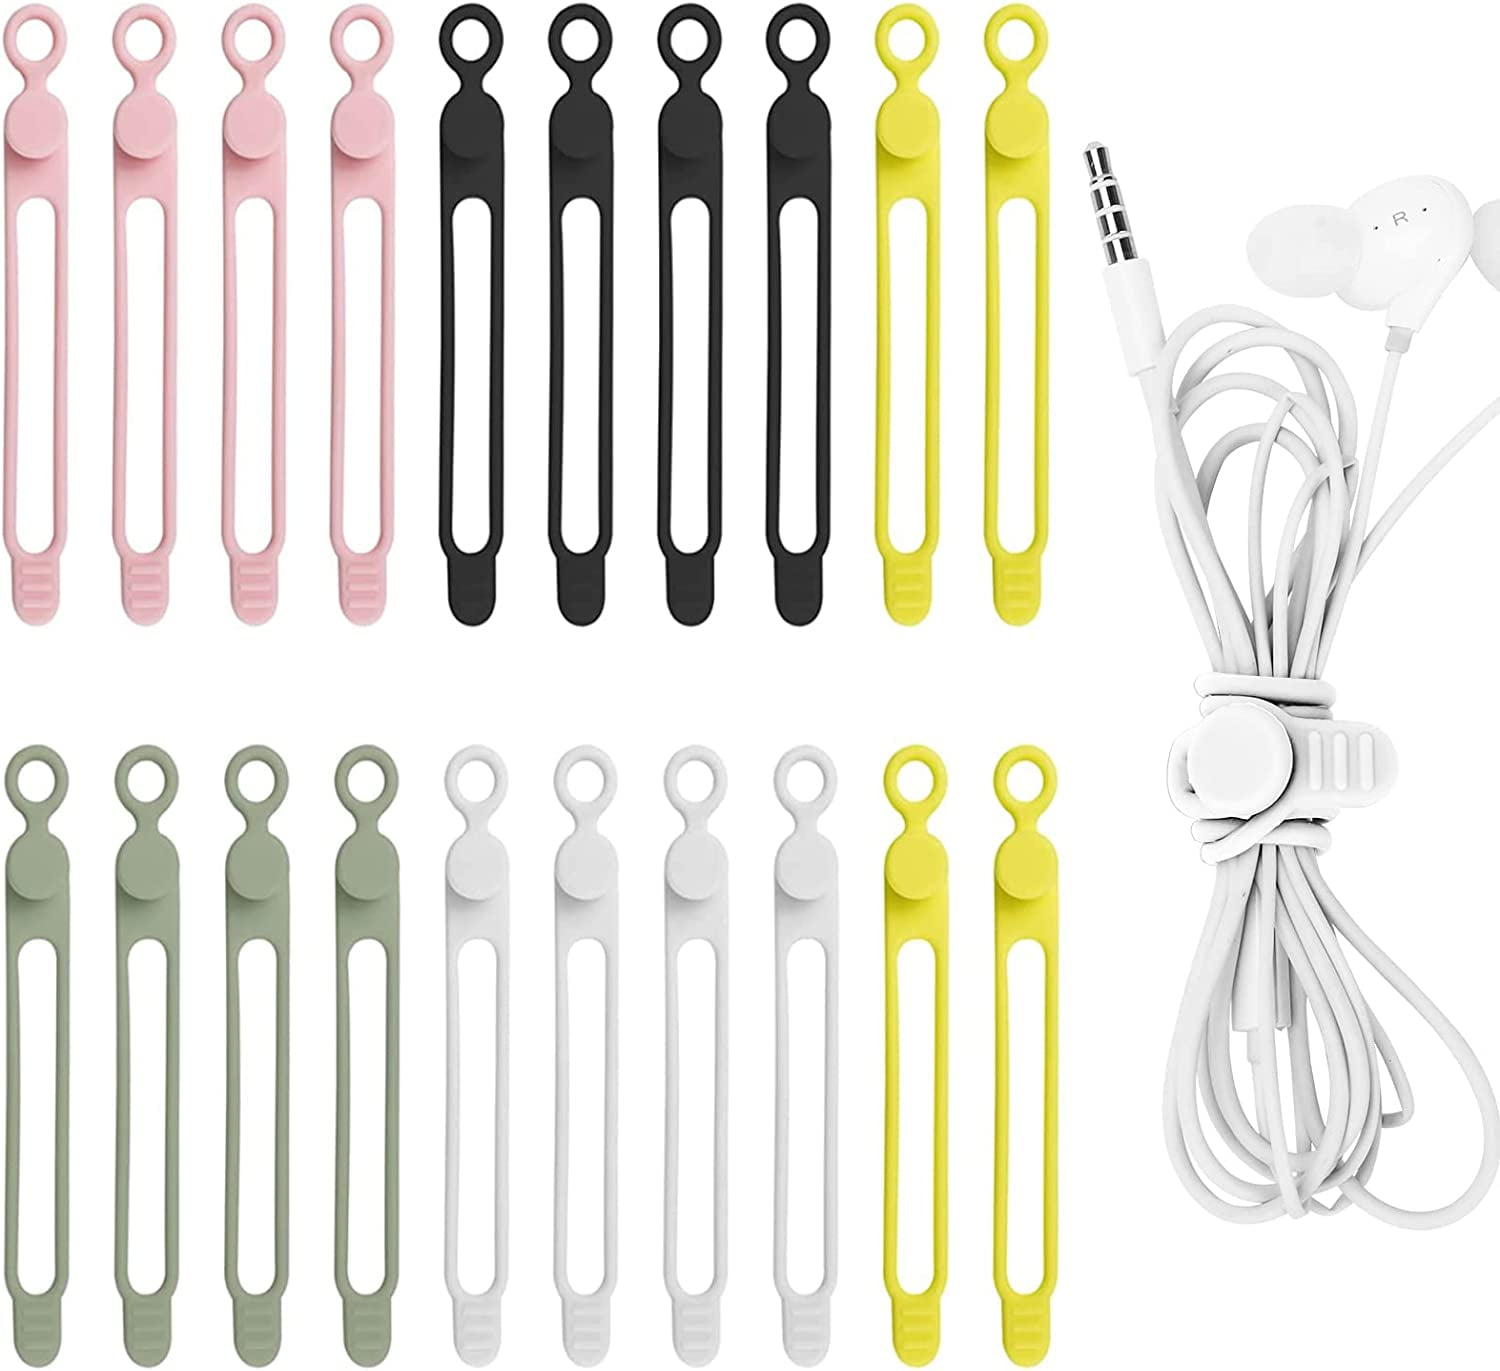 30PCS Silicone Cable Ties Straps Wire Organizer for Earphone Hook Loop Cord  Keeper Colorful Cable Wrappers for Phone Charger Mouse Audio Computer Home  Office, Kitchen, School Desk Organization 